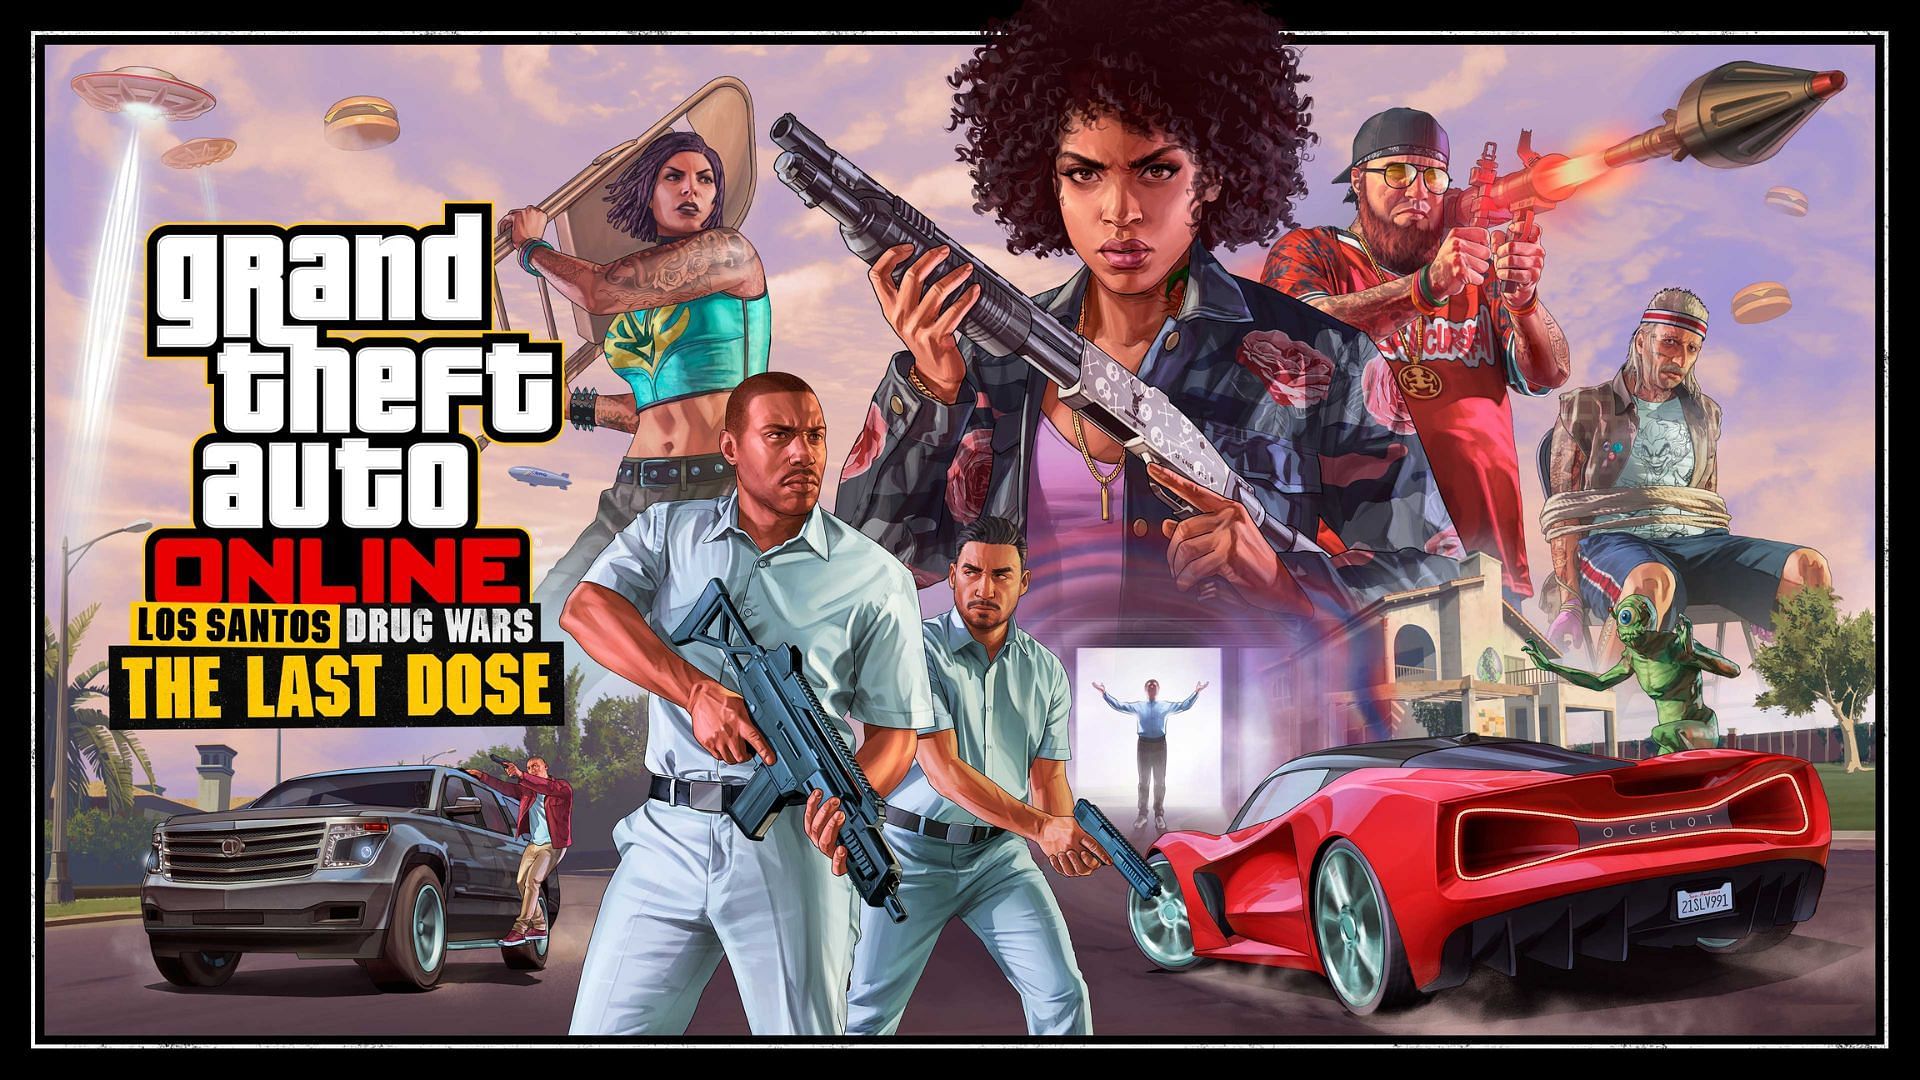 A brief about the new Last Dose Hard Mode event and rewards in GTA Online after the latest update (Image via Rockstar Games)